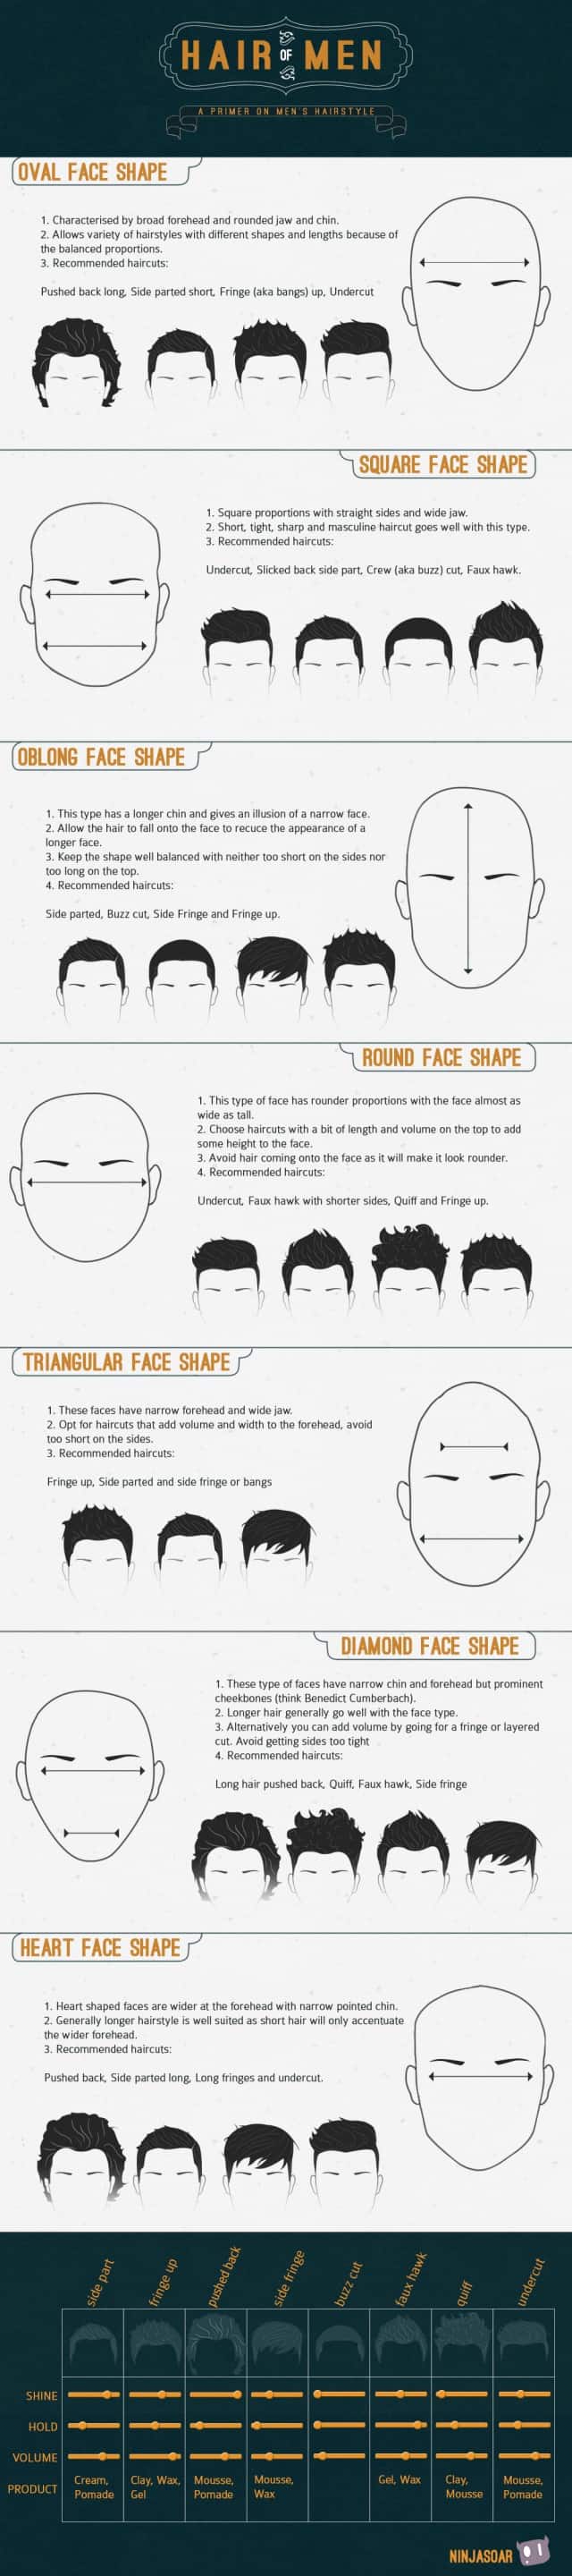 Men Hairstyles Infographic